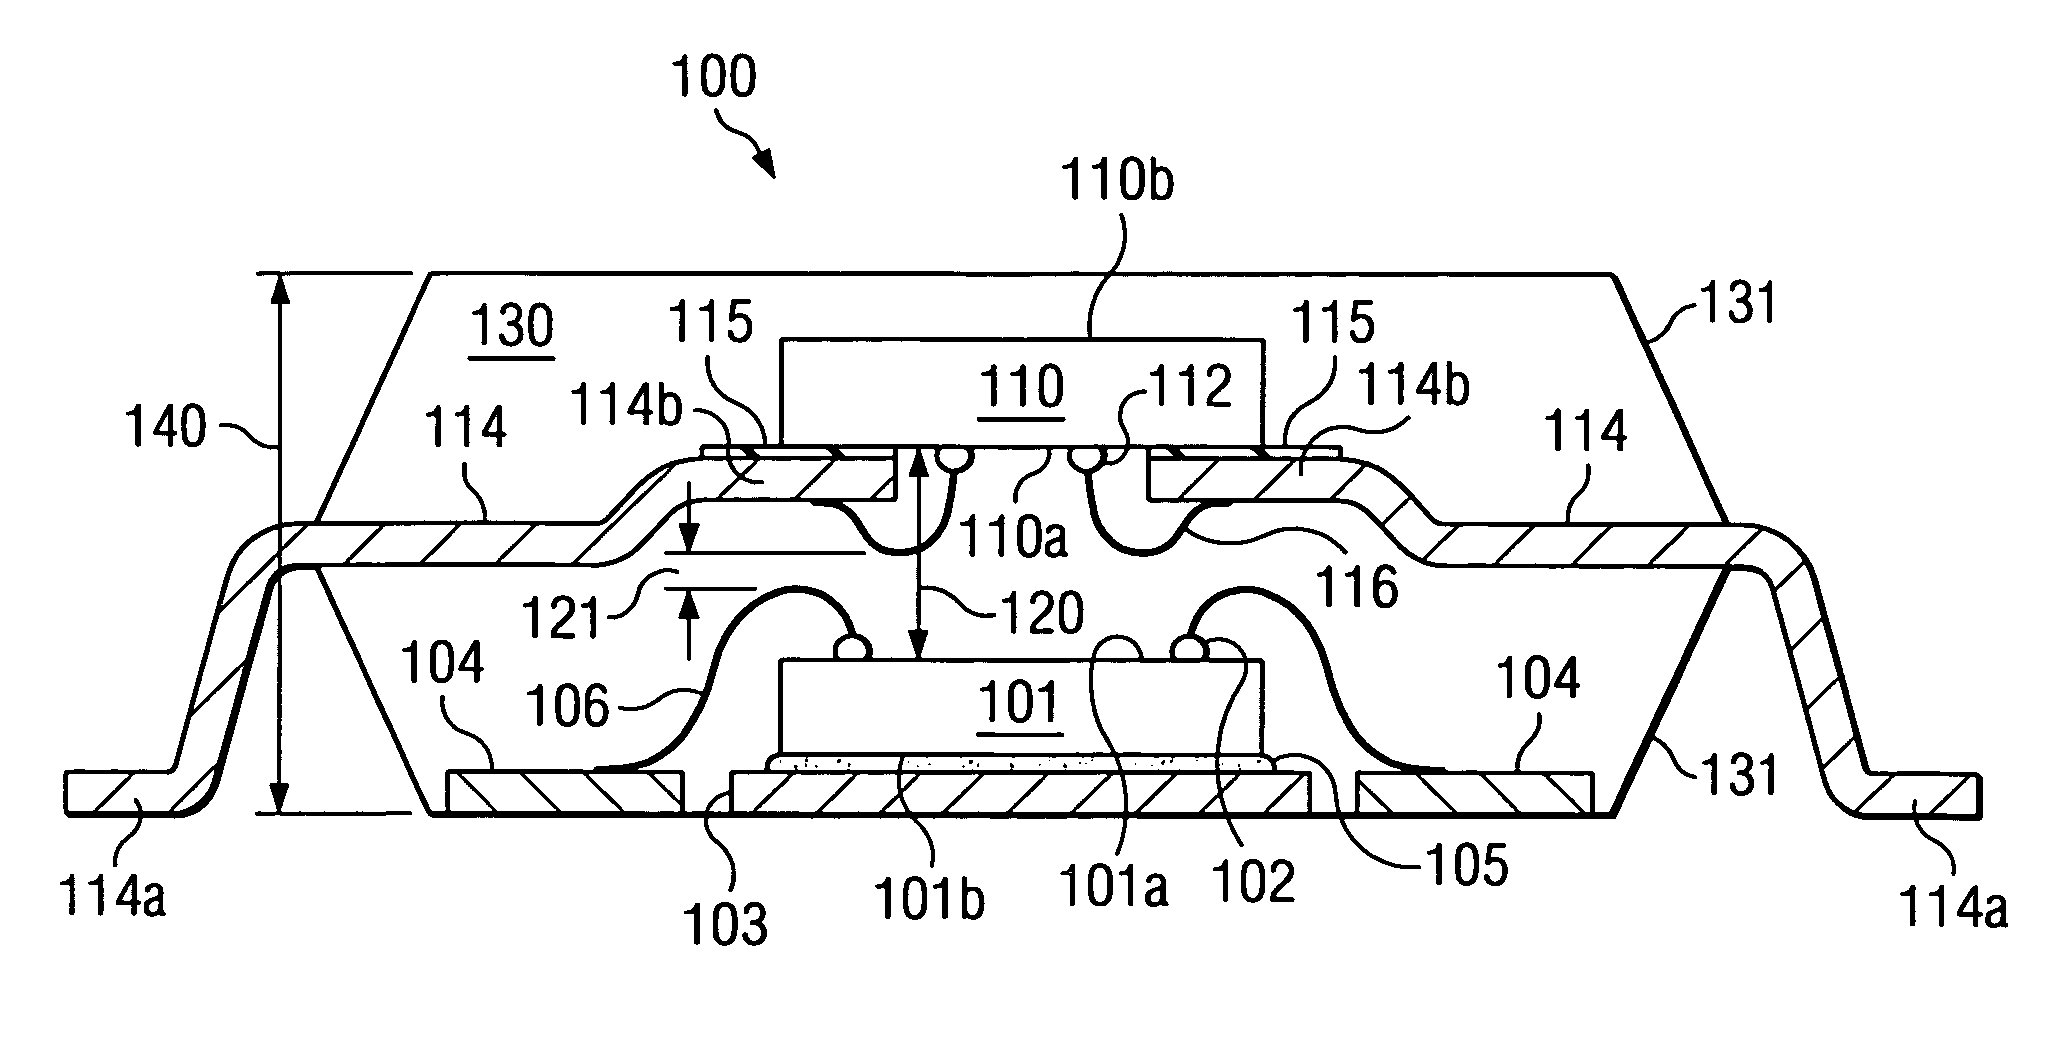 Flexible leaded stacked semiconductor package